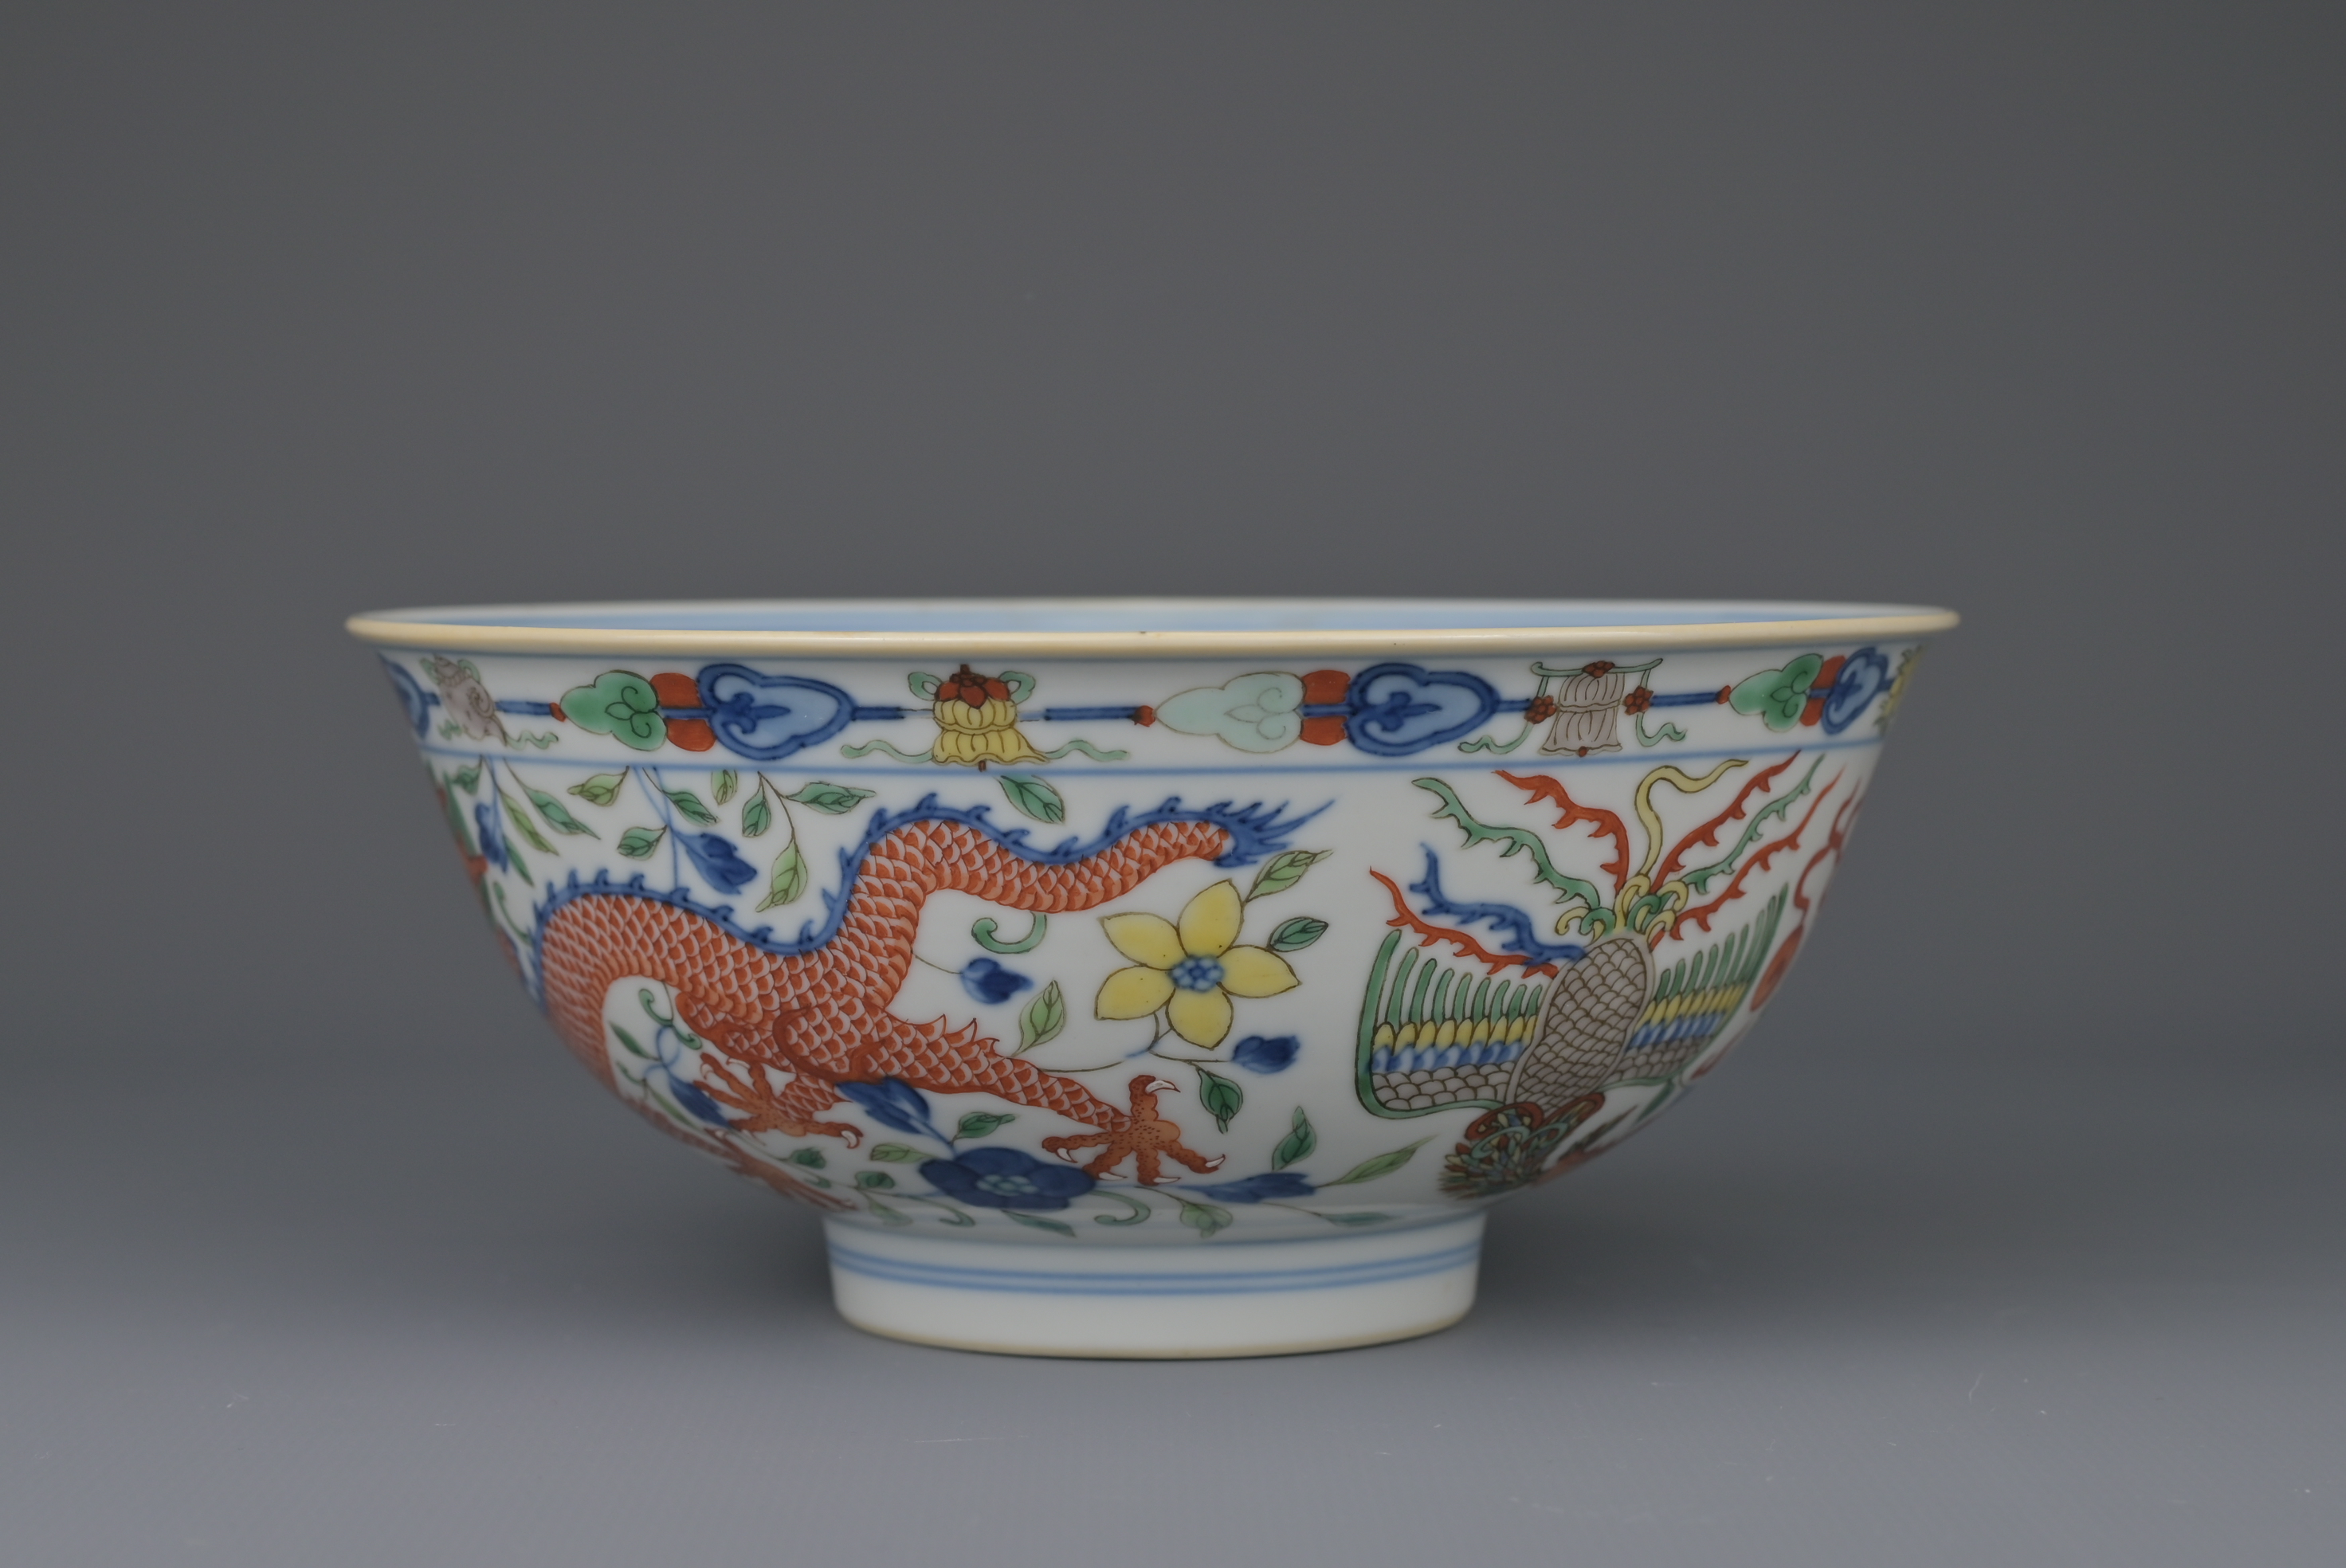 FINE CHINESE WUCAI ‘DRAGON & PHOENIX’ PORCELAIN BOWL, JIAQING MARK AND PERIOD, EARLY 19th CENTURY - Image 3 of 14